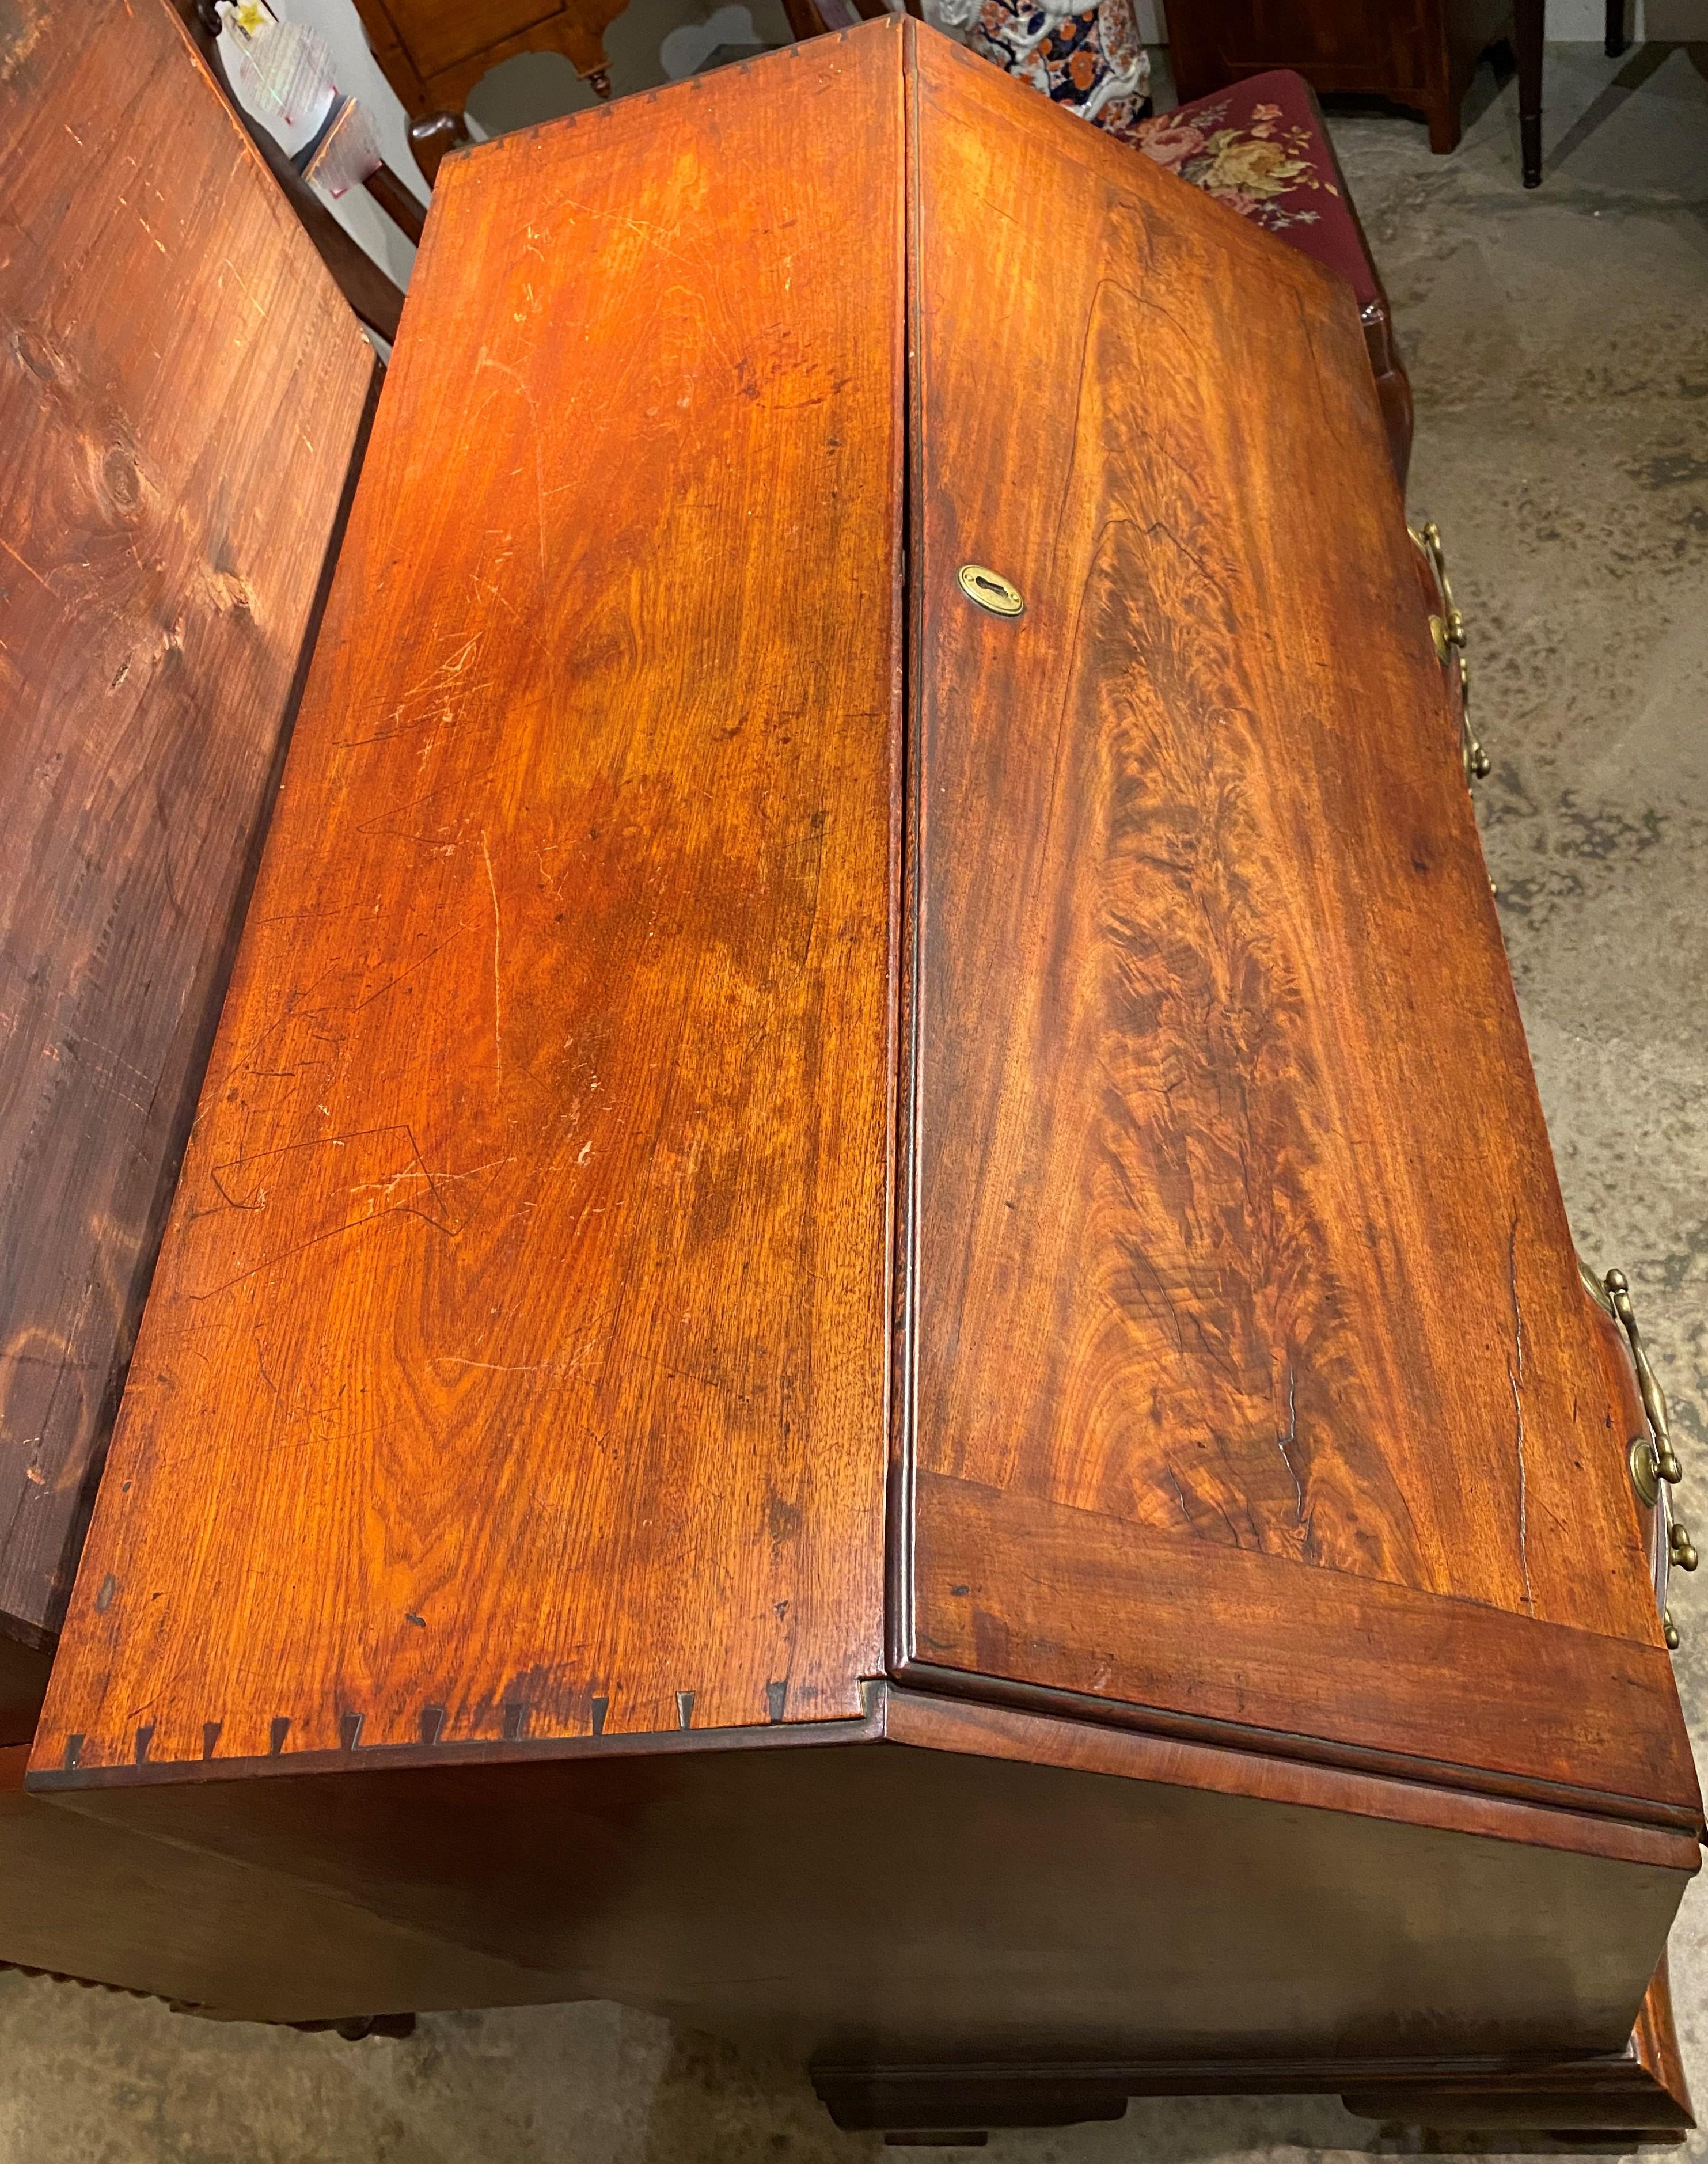 A fine mahogany Chippendale slant front desk with serpentine case, dovetailed construction, compartmentalized interior with fan carving, valanced open cubbies and fitted drawers, over a well-used writing surface, four long drawers with original